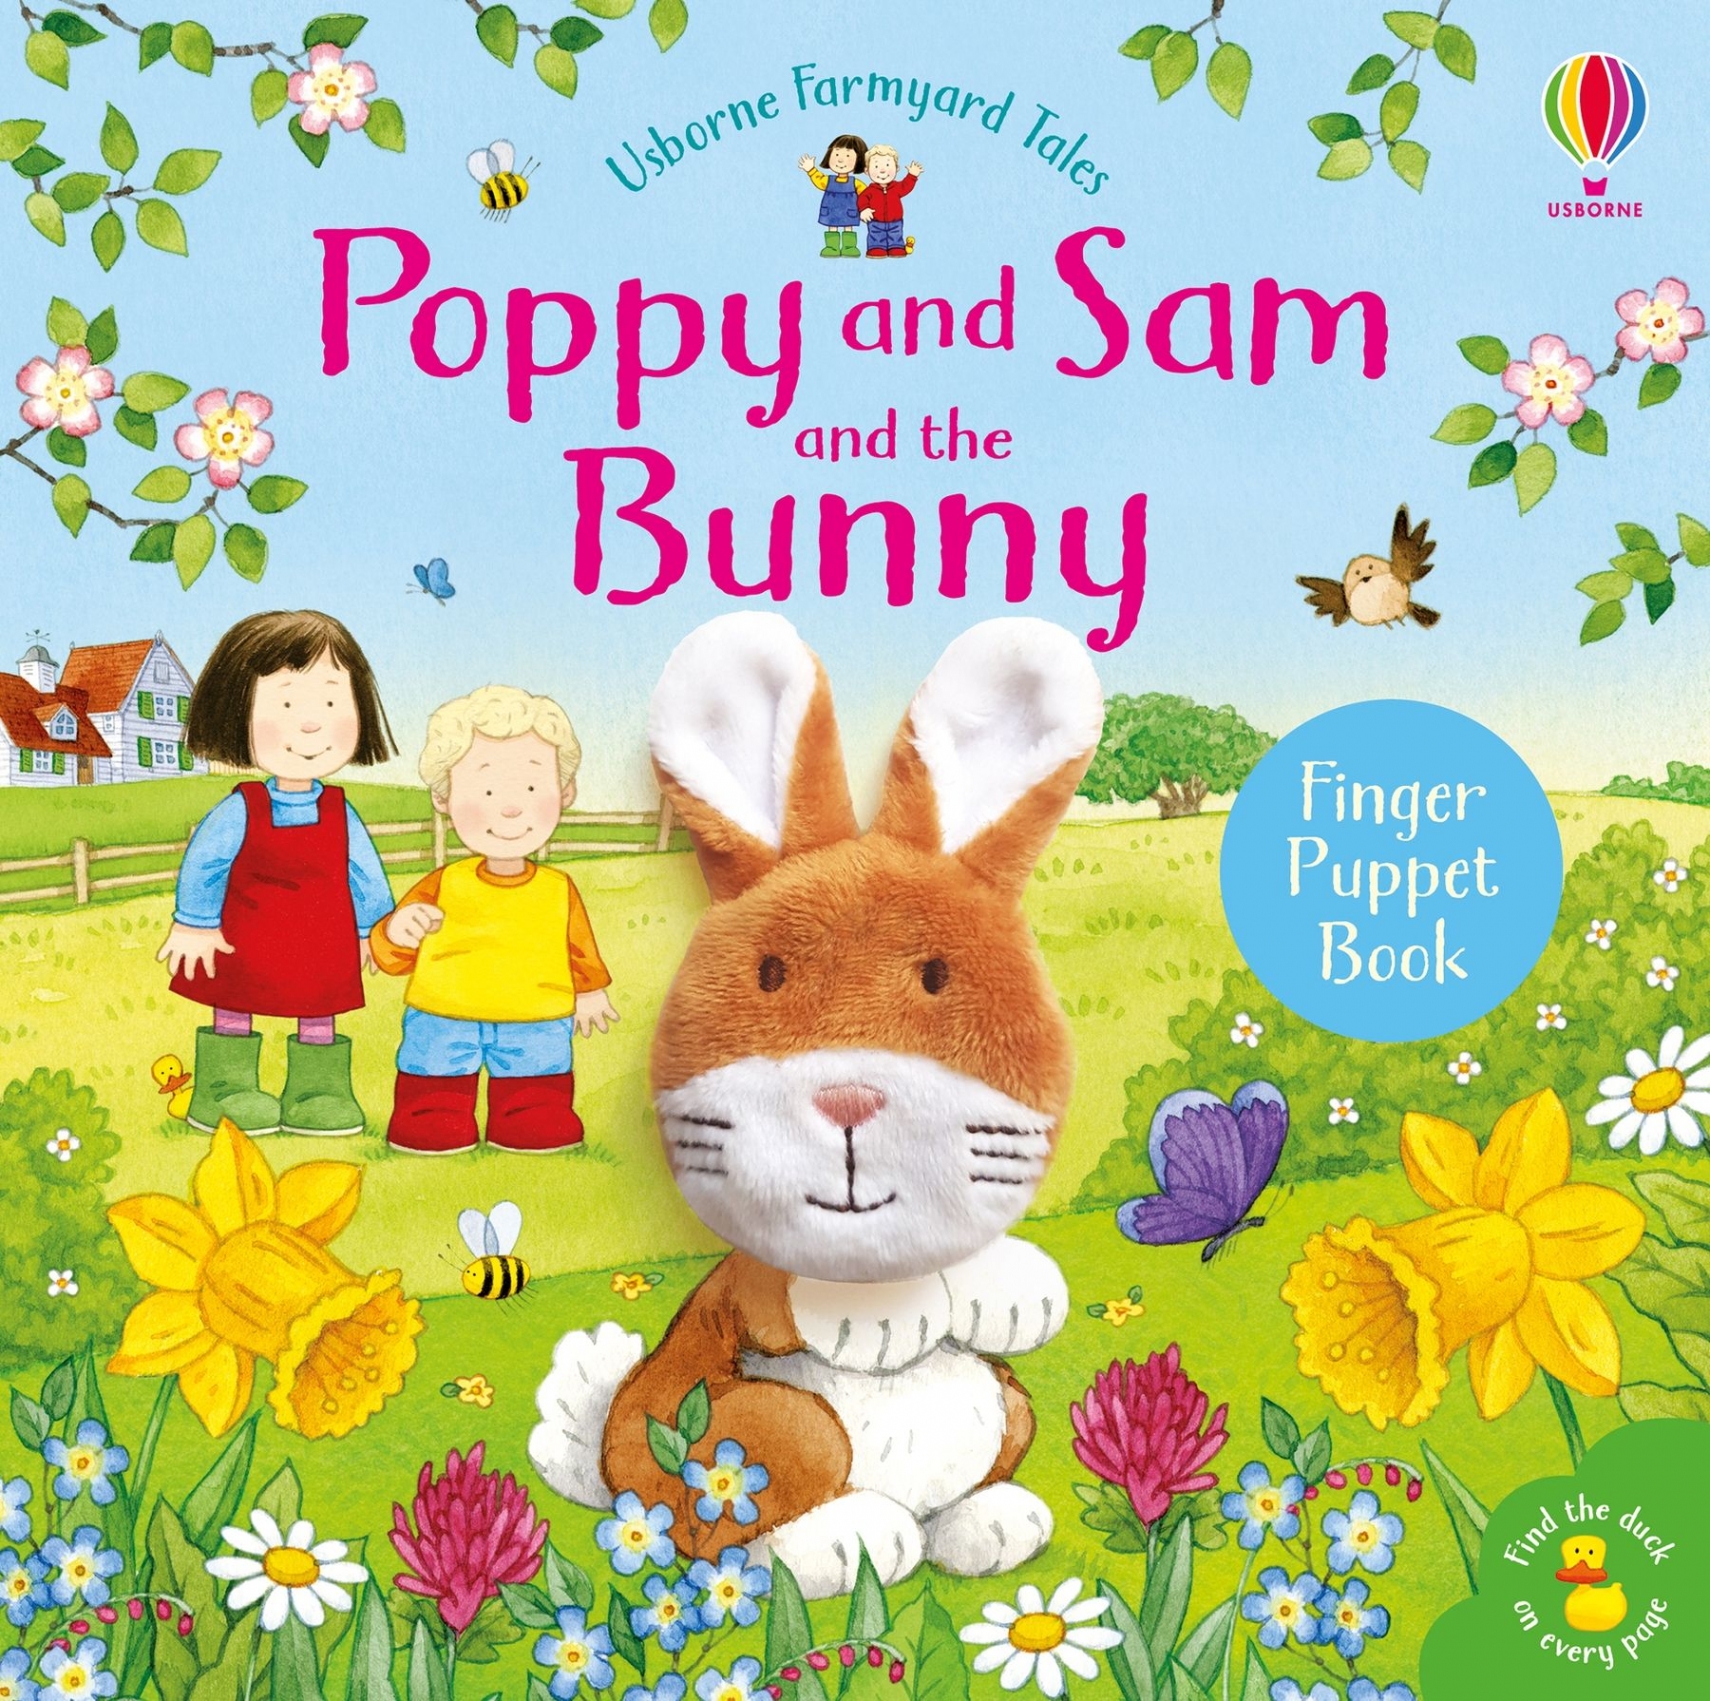 Farmyard Tales: Poppy and Sam and the Bunny (board book) 